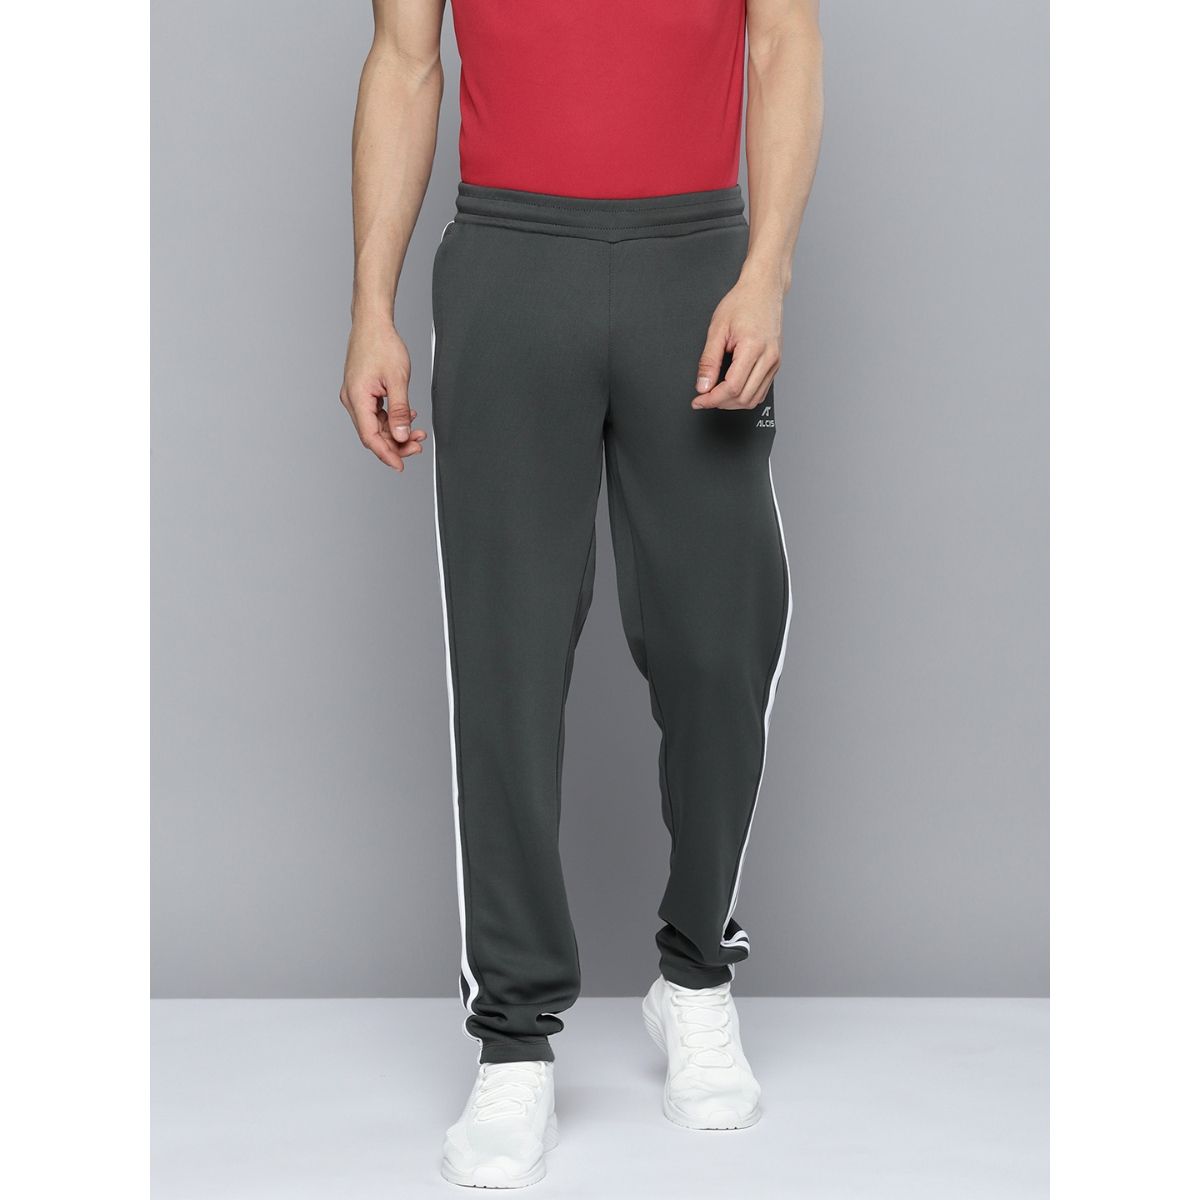 Buy Track Pants for Men Online in India  aguantein  Aguante